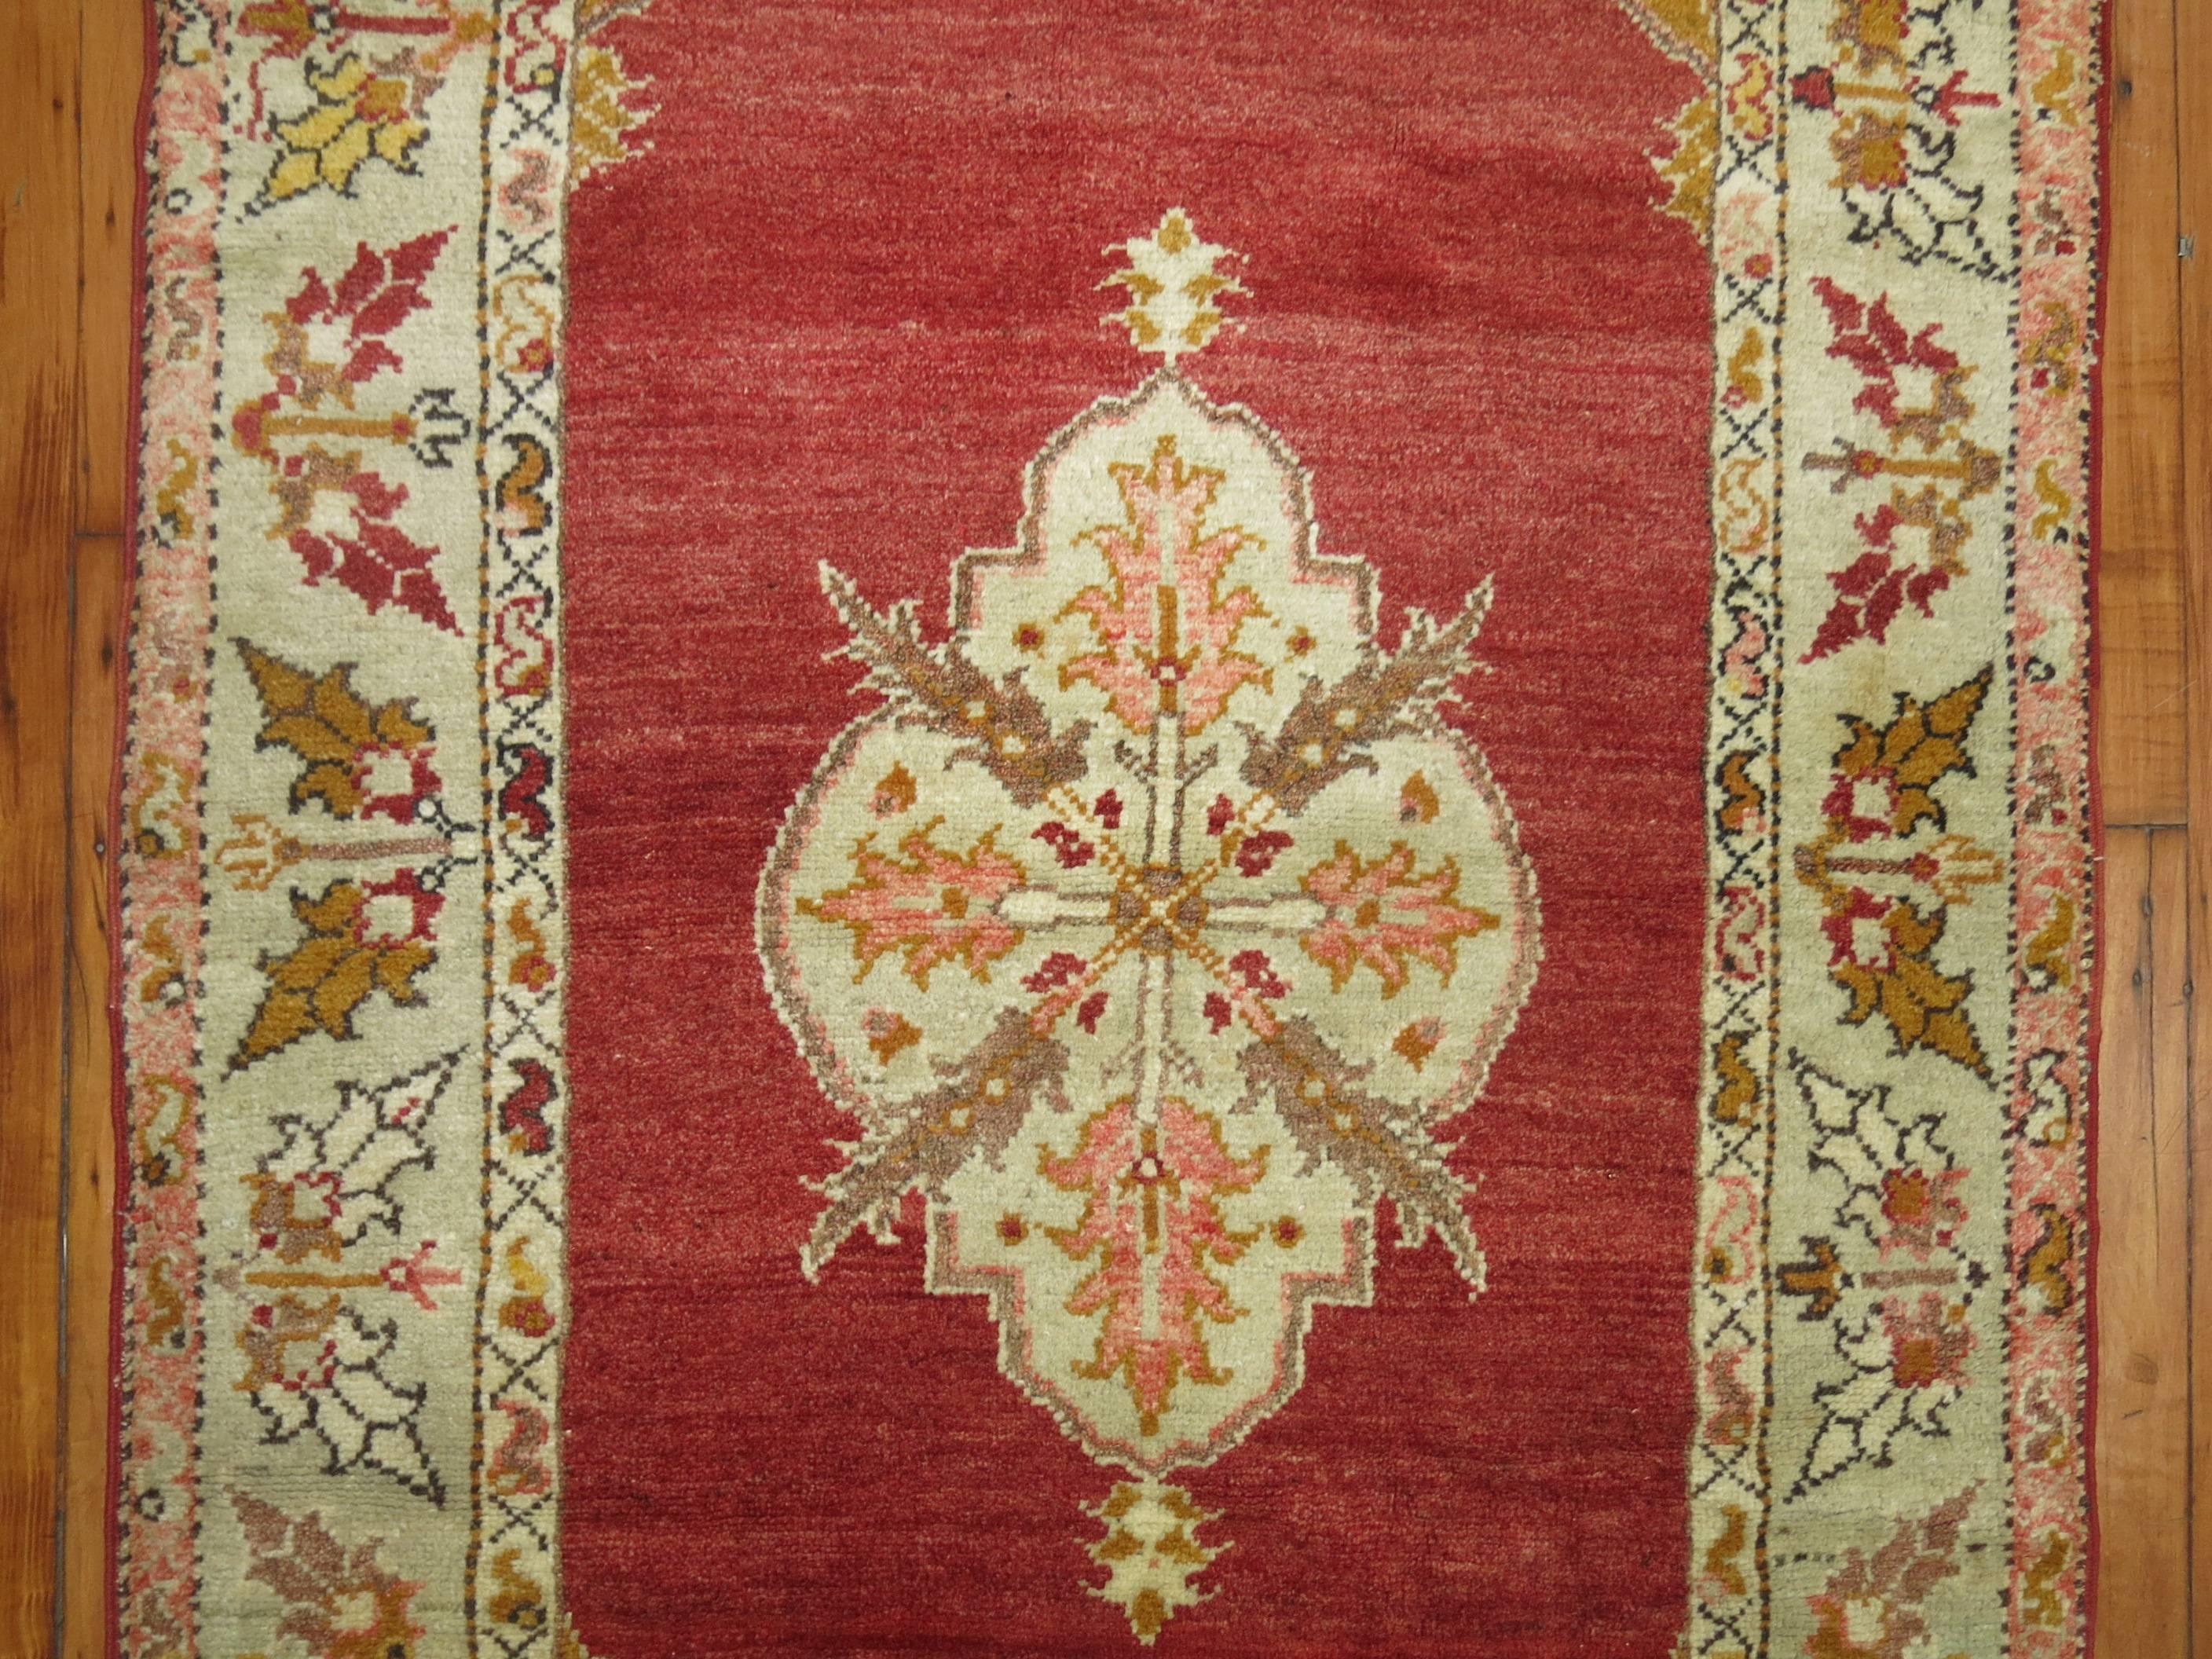 Antique Turkish Scatter Throw Rug In Excellent Condition For Sale In New York, NY